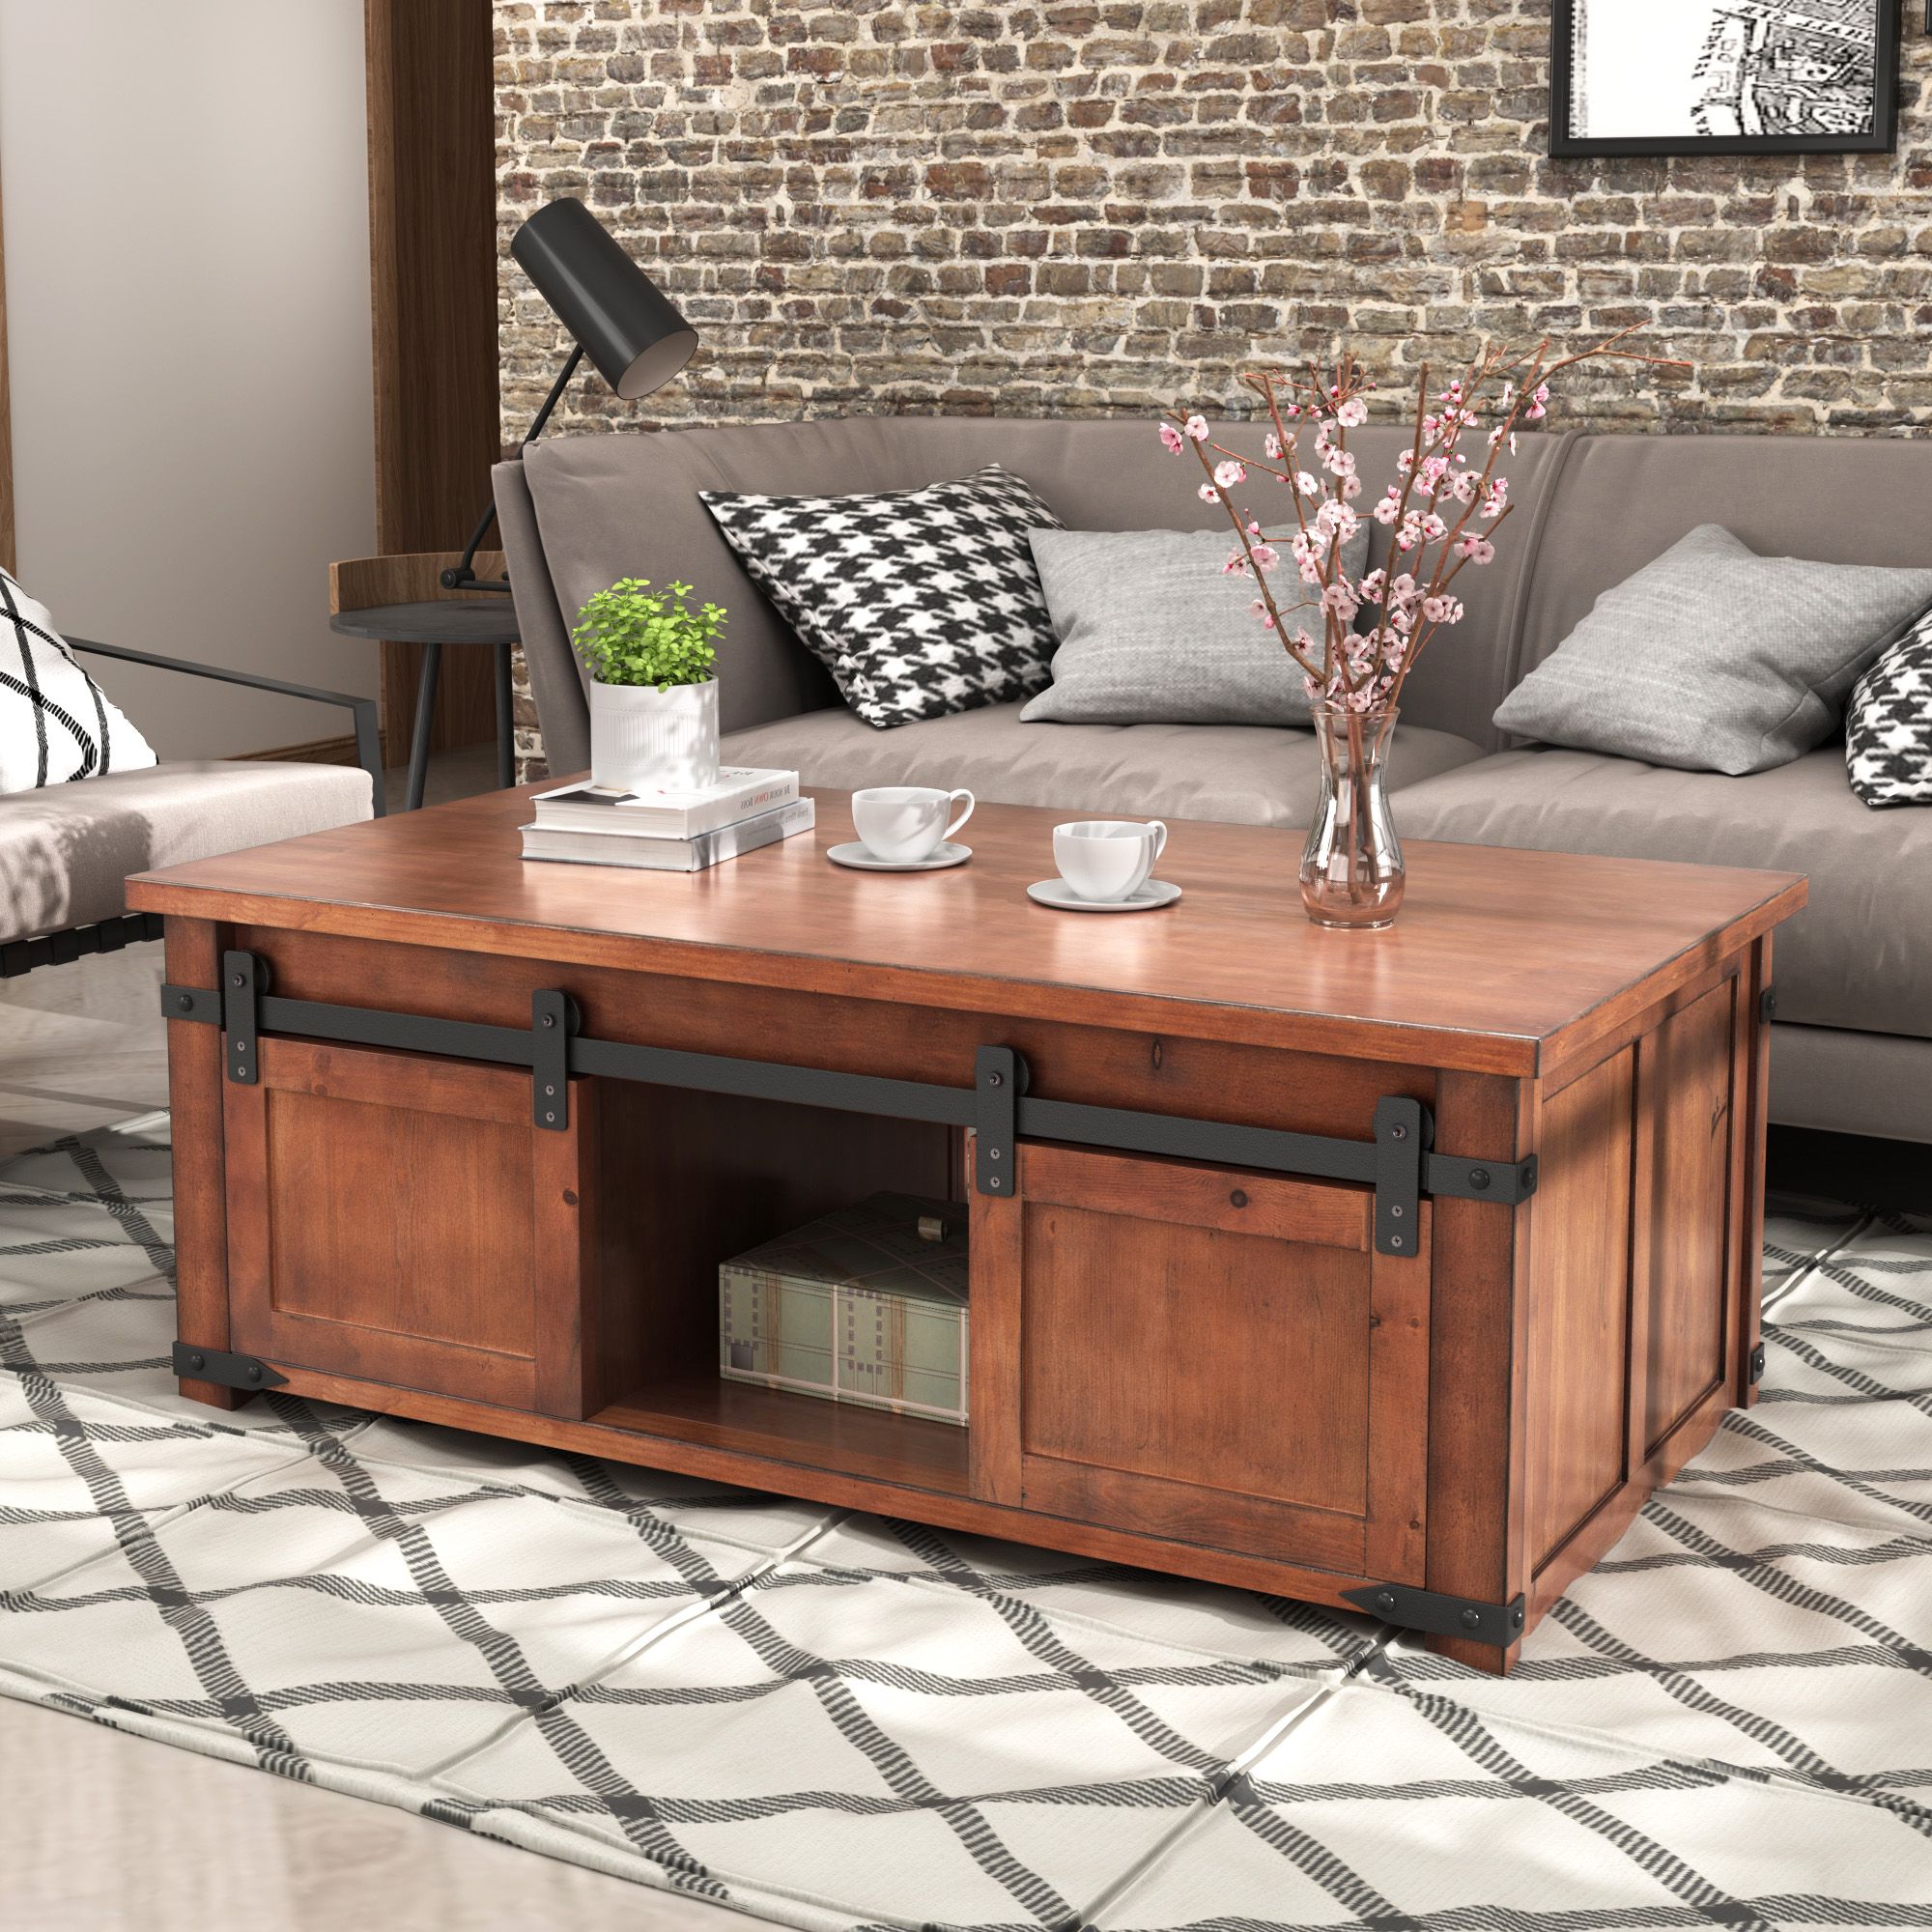 Black Wood Storage Coffee Tables For Well Known Farmhouse Coffee Table, Coffee Table With Storage Shelf (View 6 of 20)